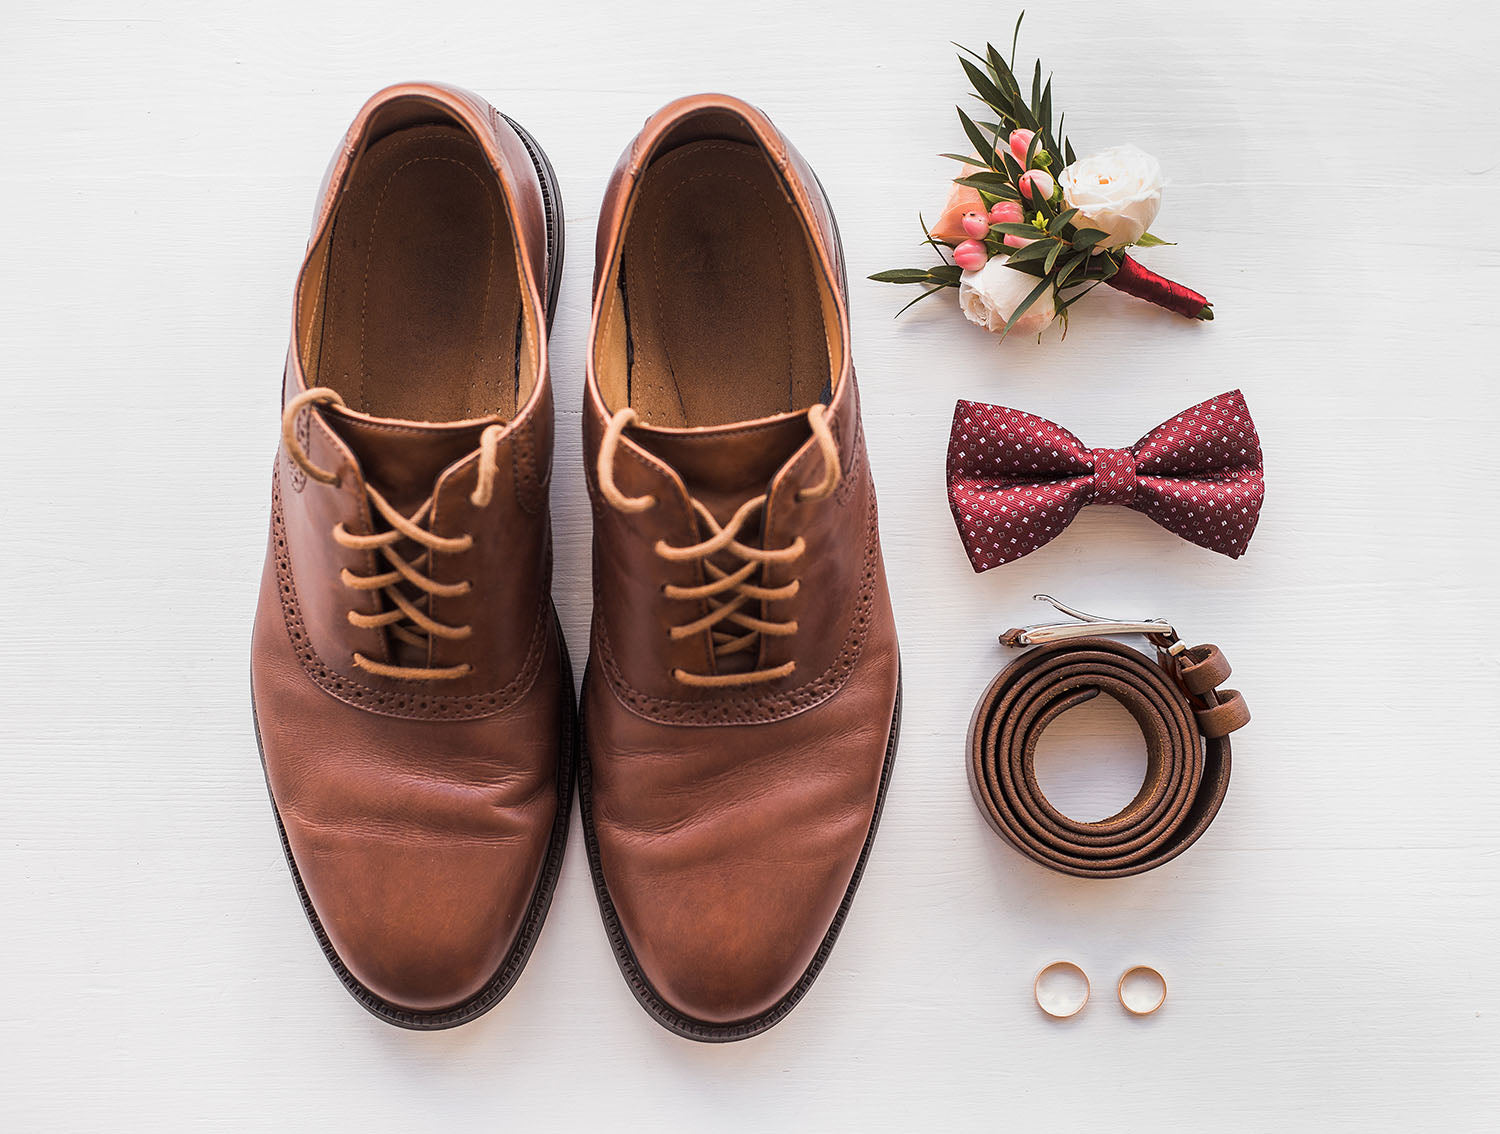 Tie Styles for Your Wedding Day